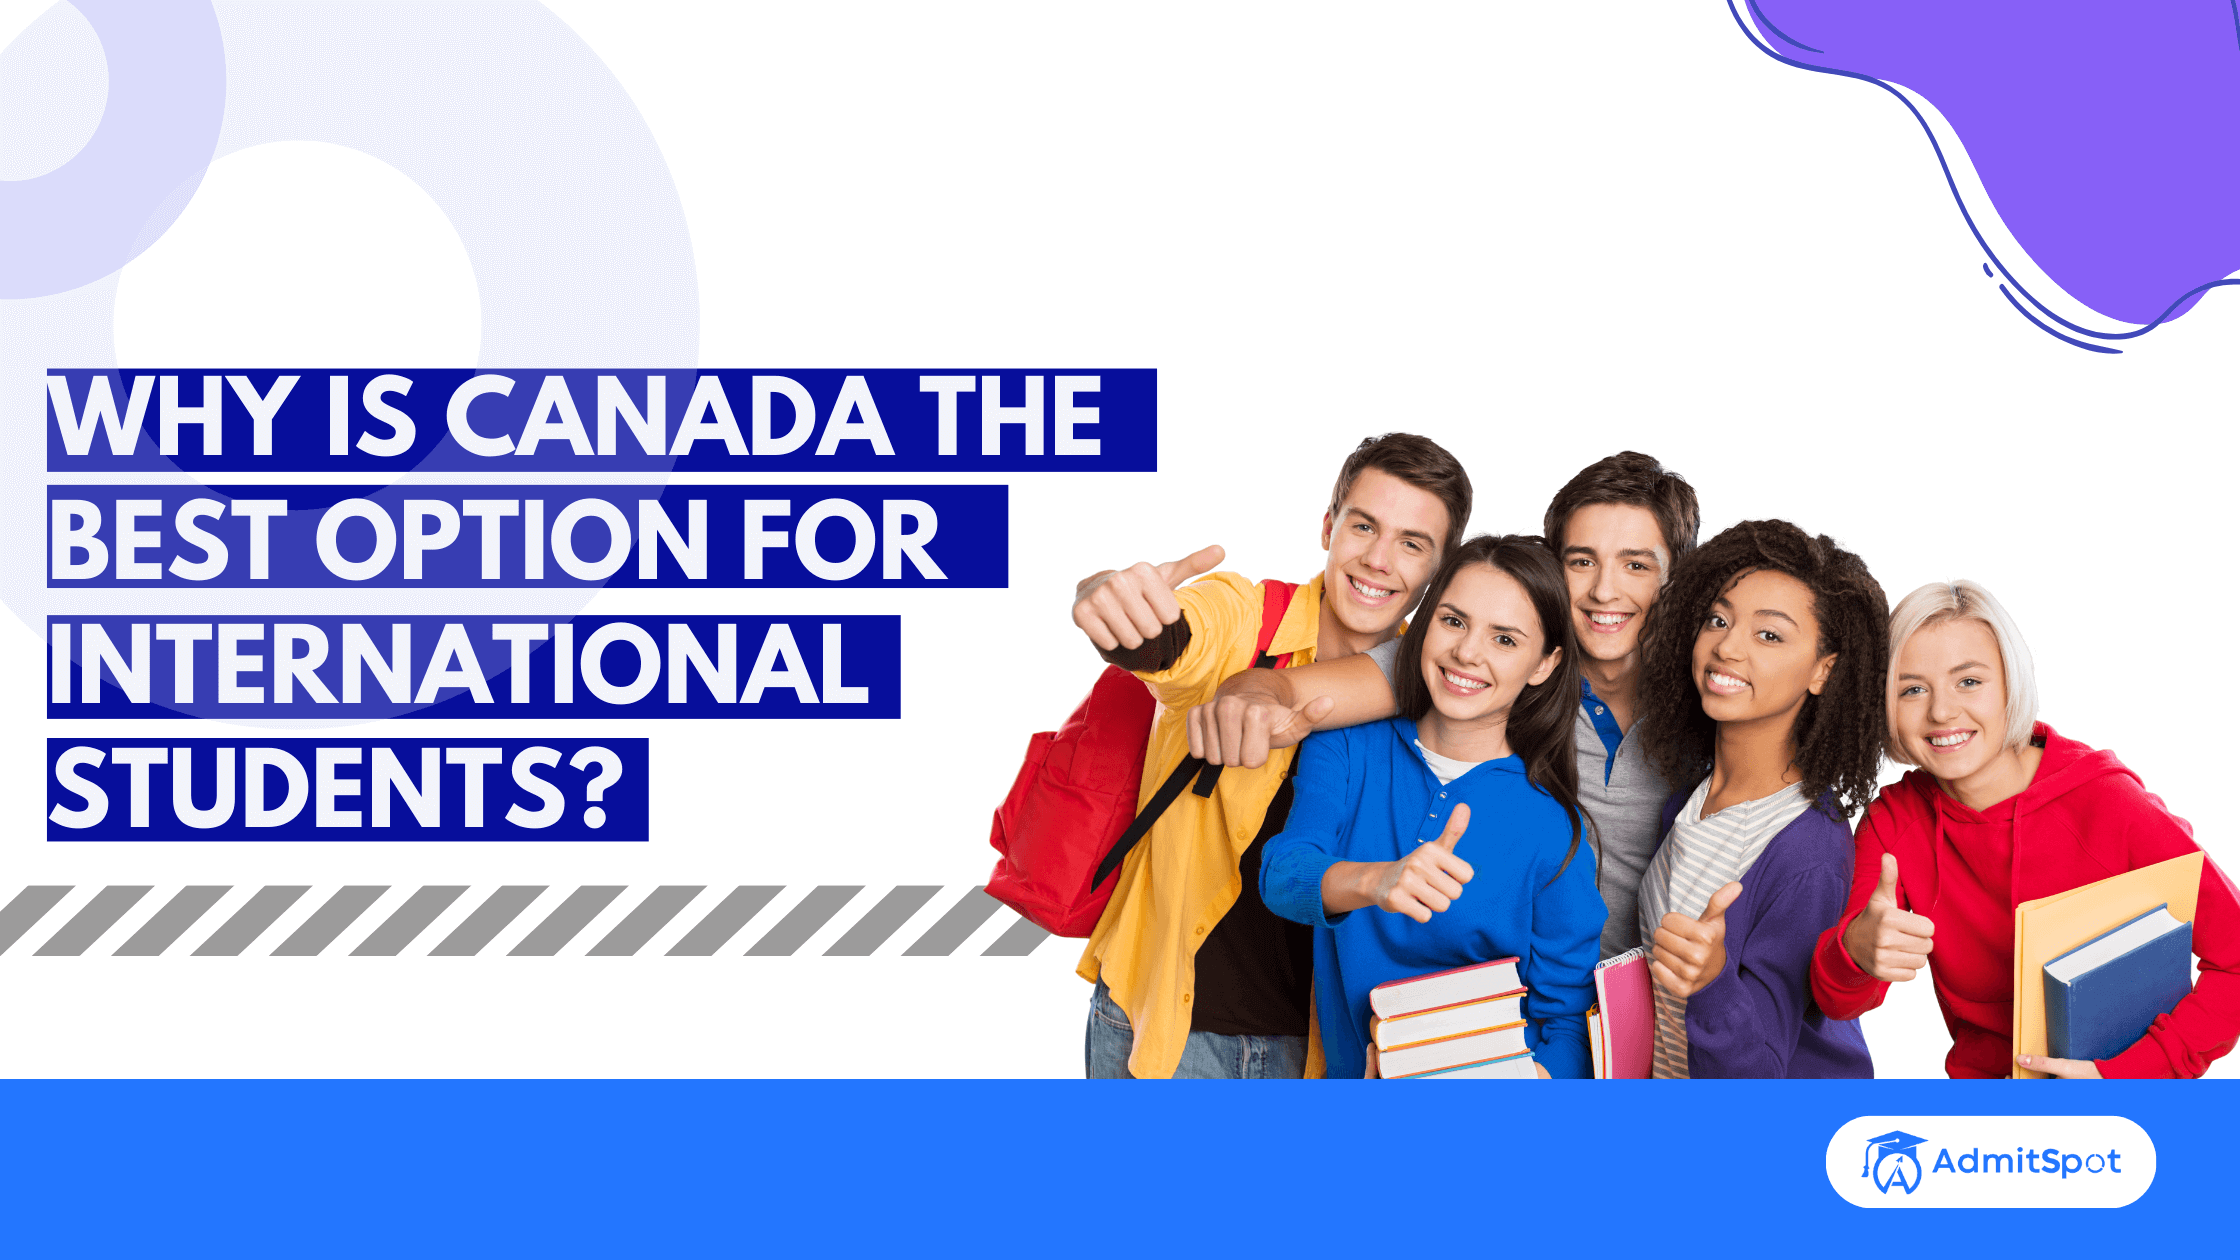  Why is Canada the best option for International Students?